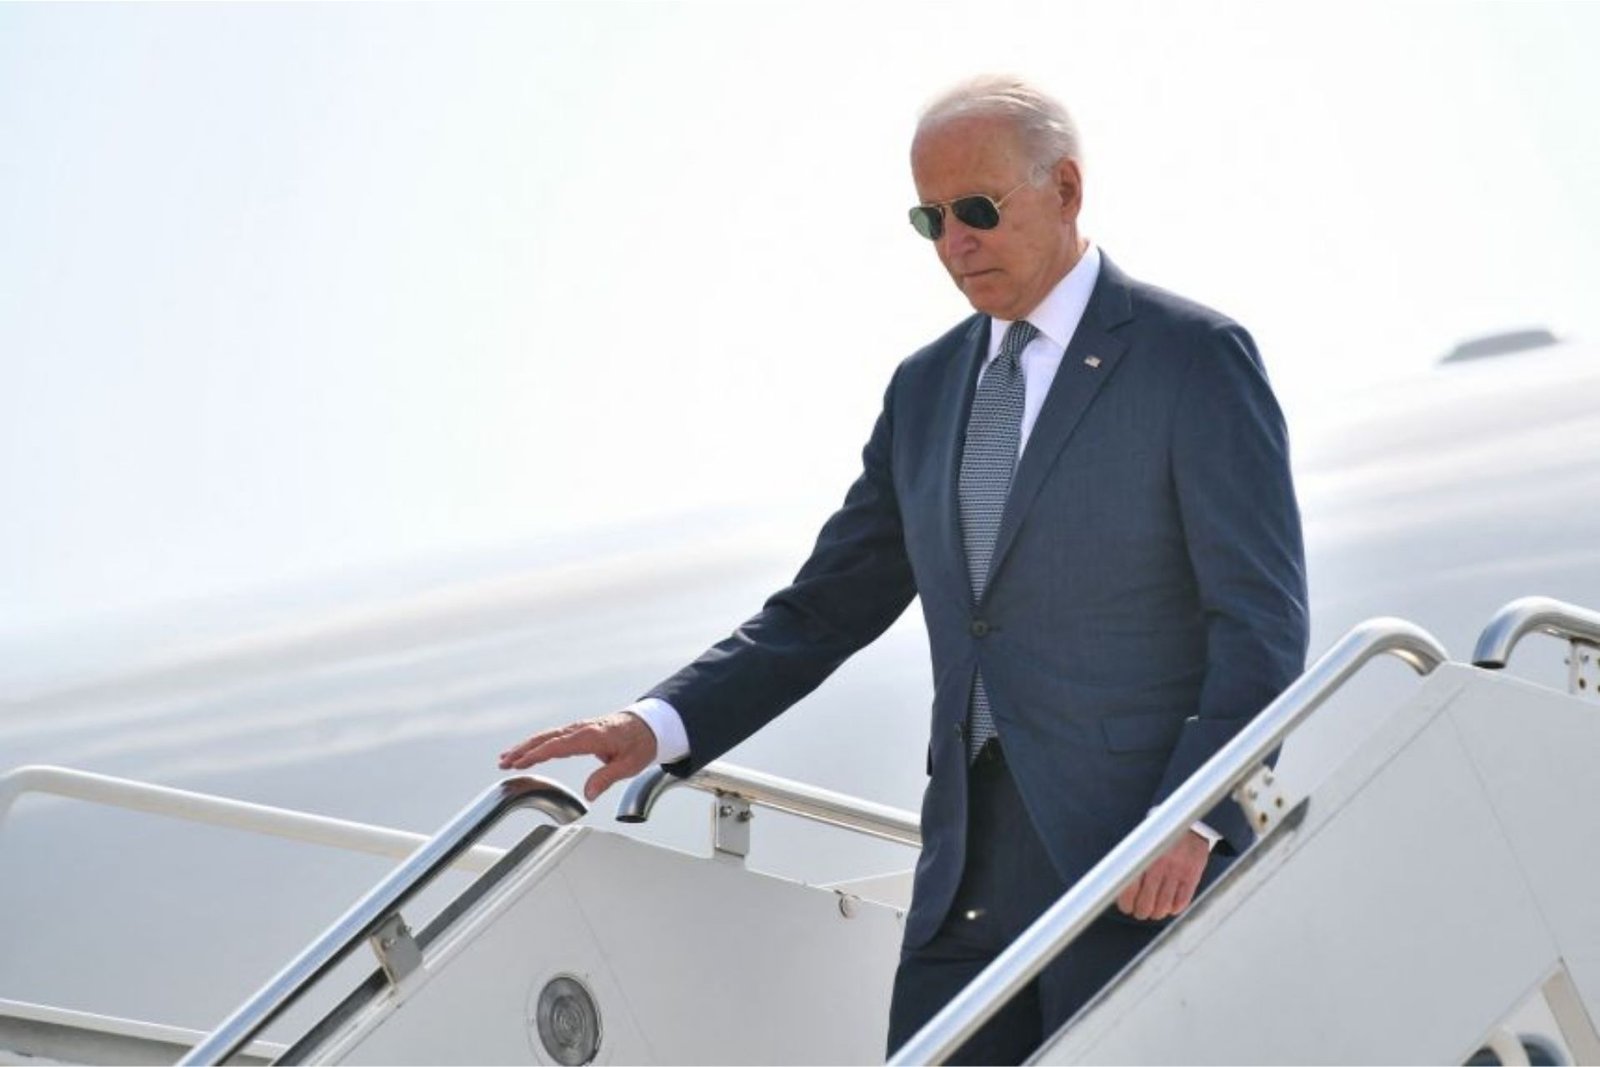 Biden Will Meet With Local Leaders To Re-Energize The Fight Against Gun Violence.